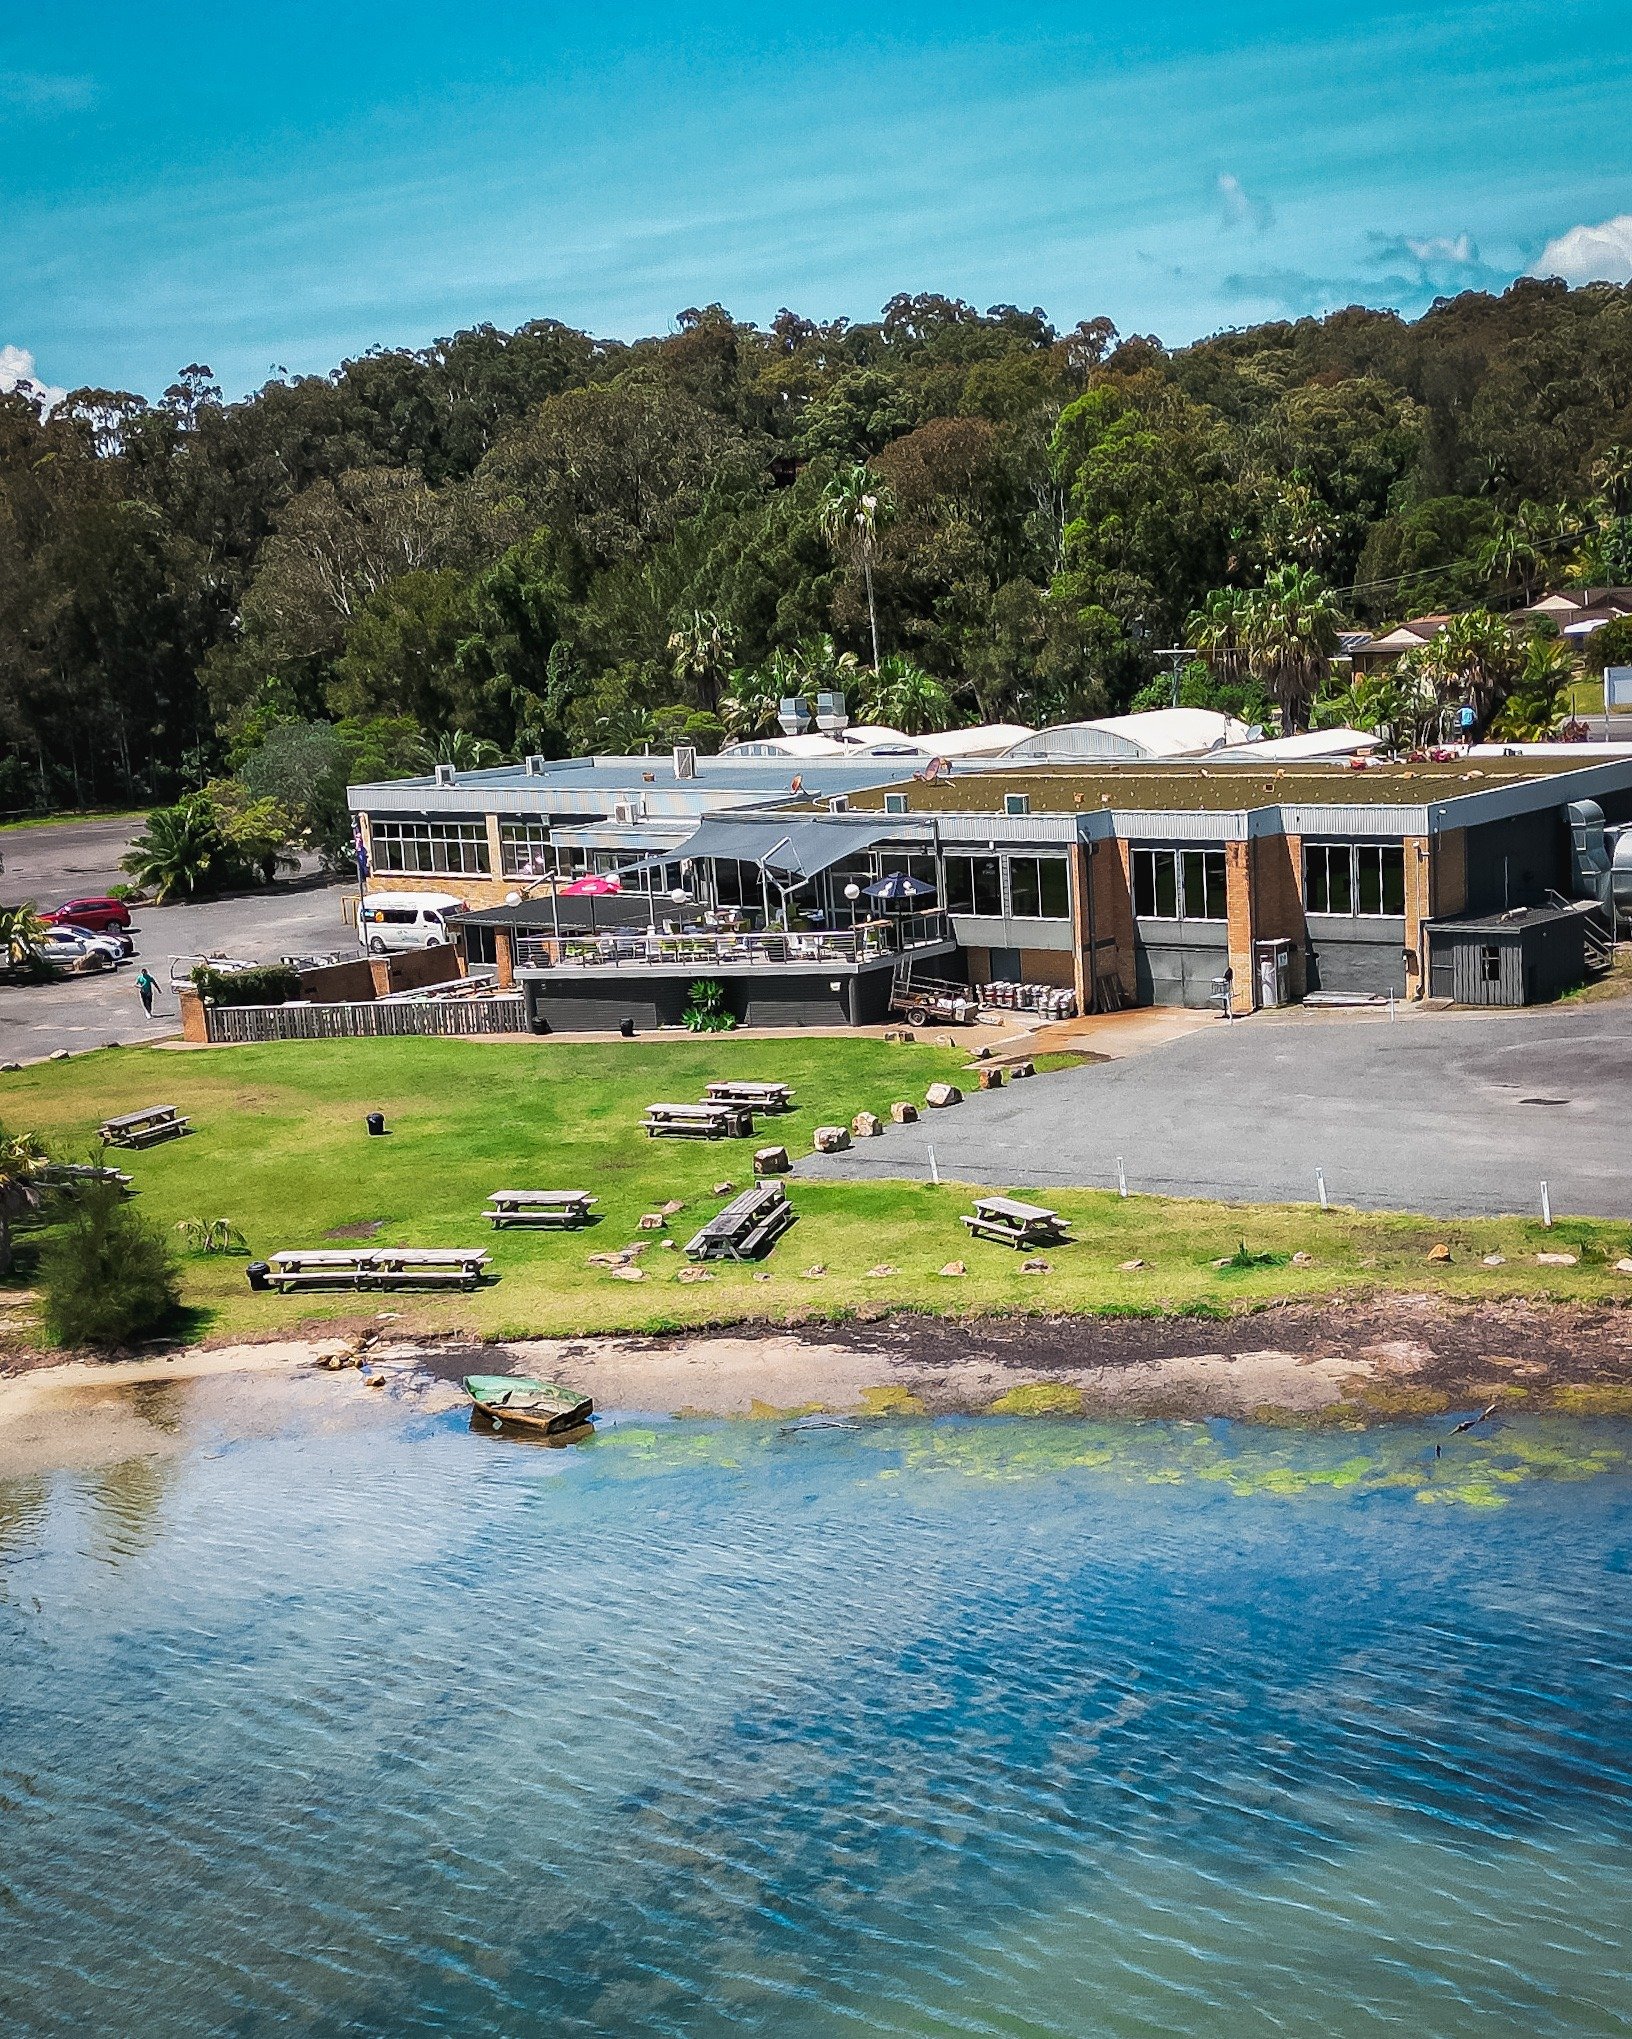 Name a better place to enjoy a meal, refreshment and watch the sunset on the @barringtoncoast 
We'll wait🥩🍻🥂🌅
#TheRecky #pacificpalms #elizabethbeach #barringtoncoast #newsouthwales #seeaustralia #yourlocalclub